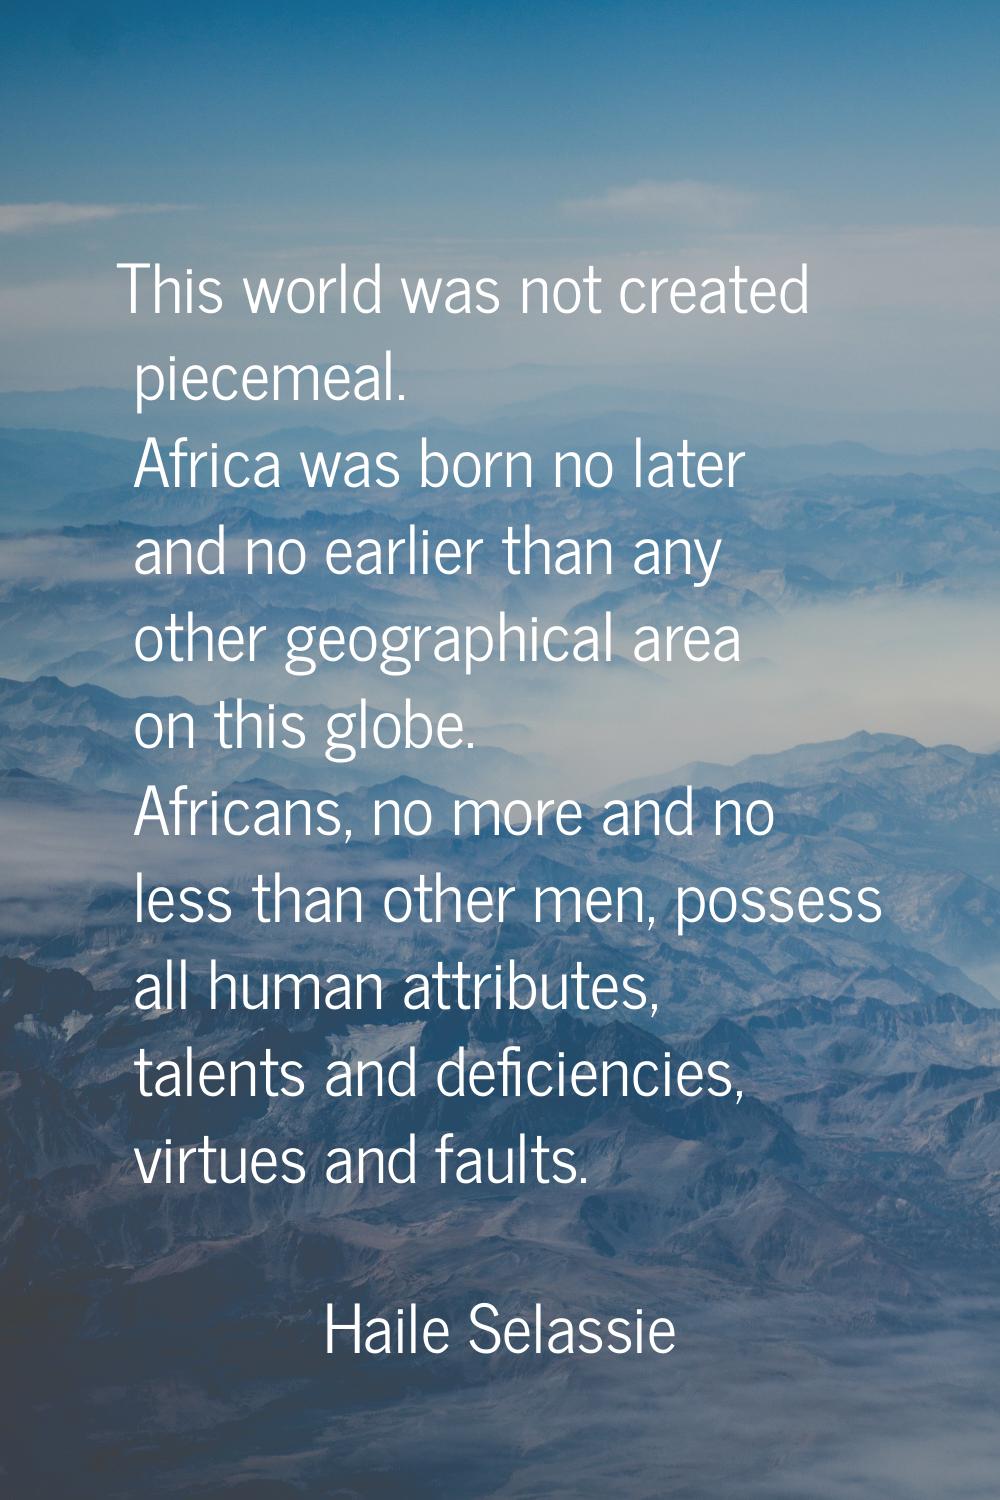 This world was not created piecemeal. Africa was born no later and no earlier than any other geogra